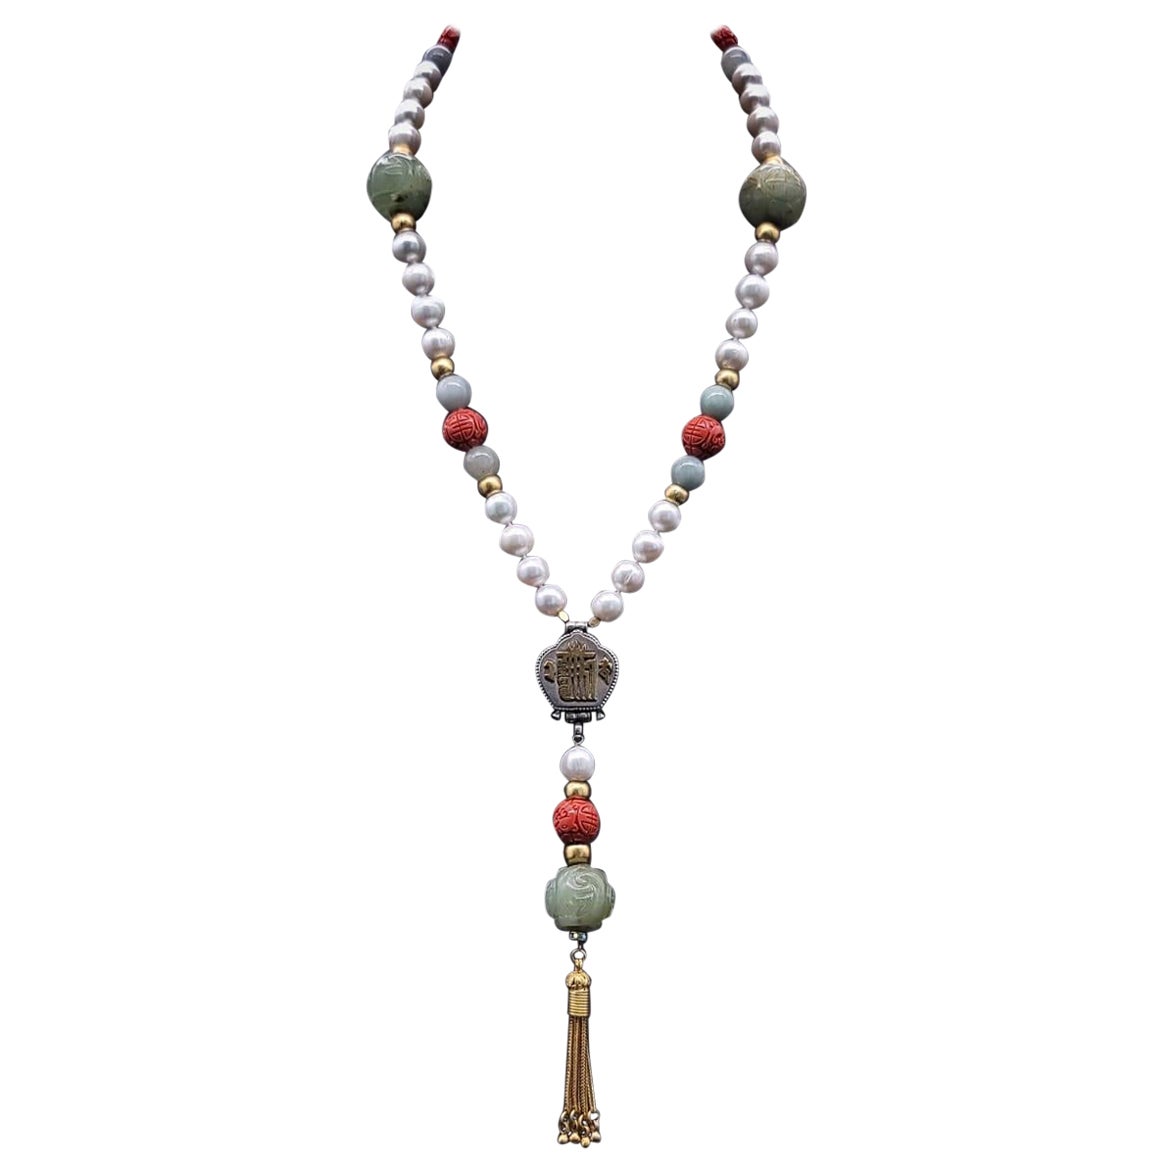 A.Jeschel Long Pearl necklace with Jade carved beads.